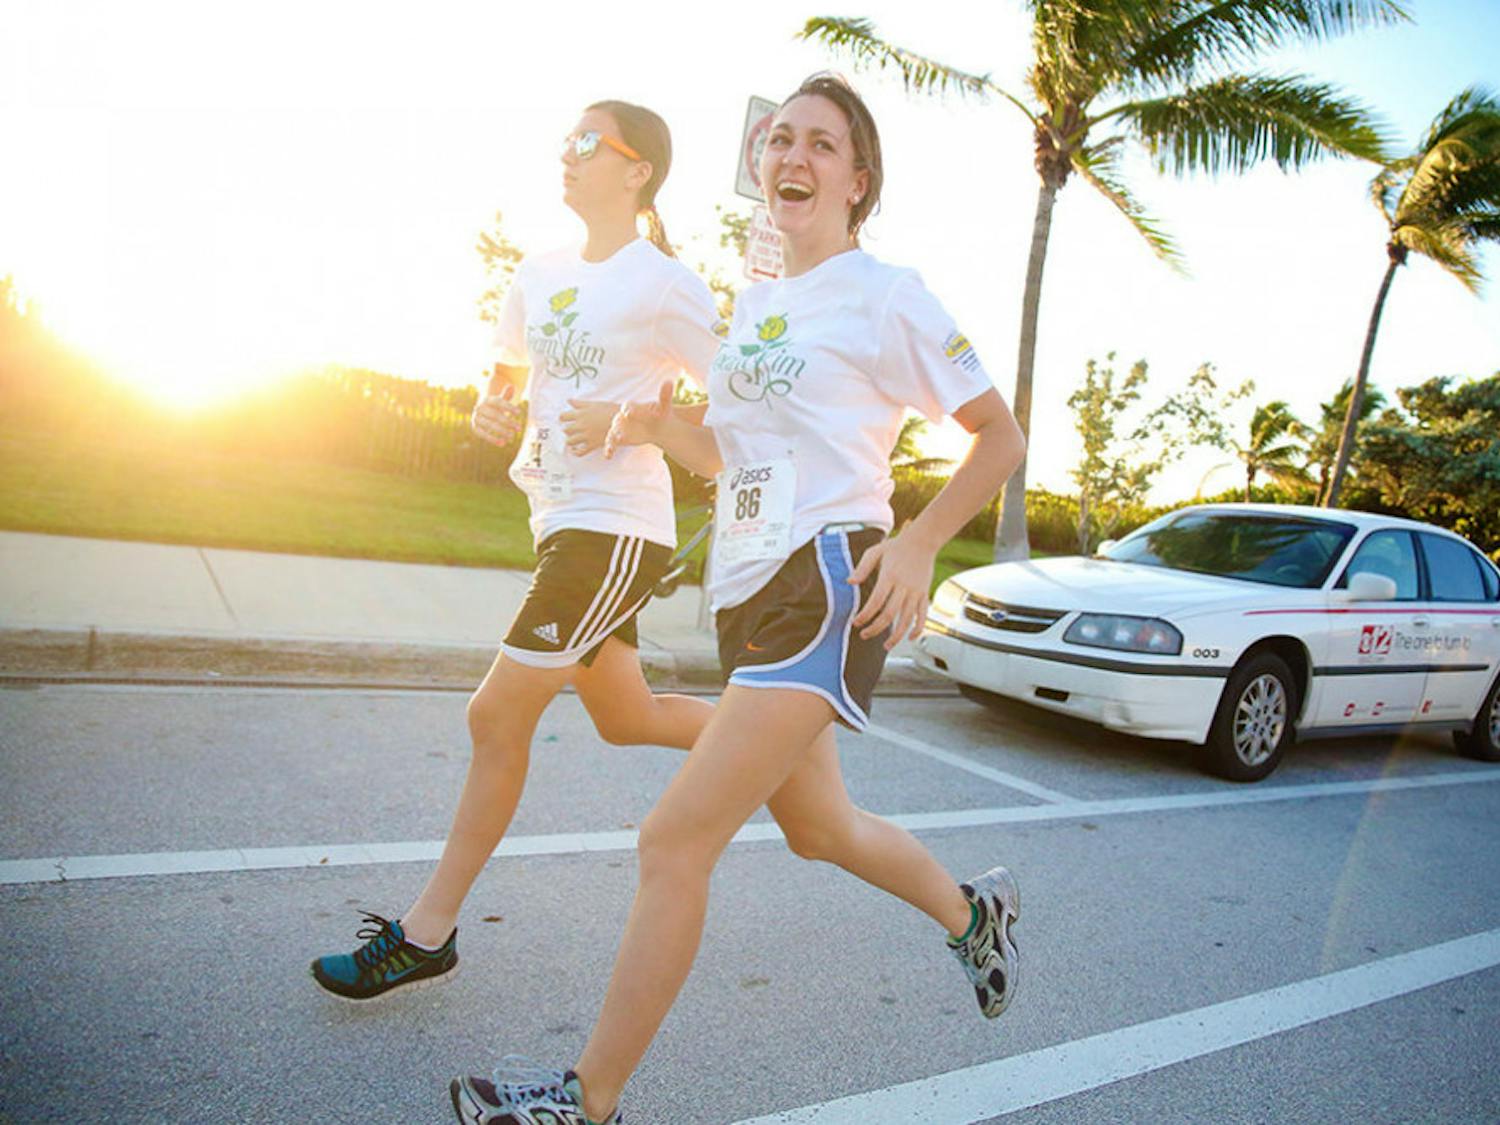 Sarah Lambert, 21, jogging with friend, Ryenne Dietrick, 17 at Race for Hope –&nbsp;Aid to Victims of Domestic Abuse in Delray Beach.